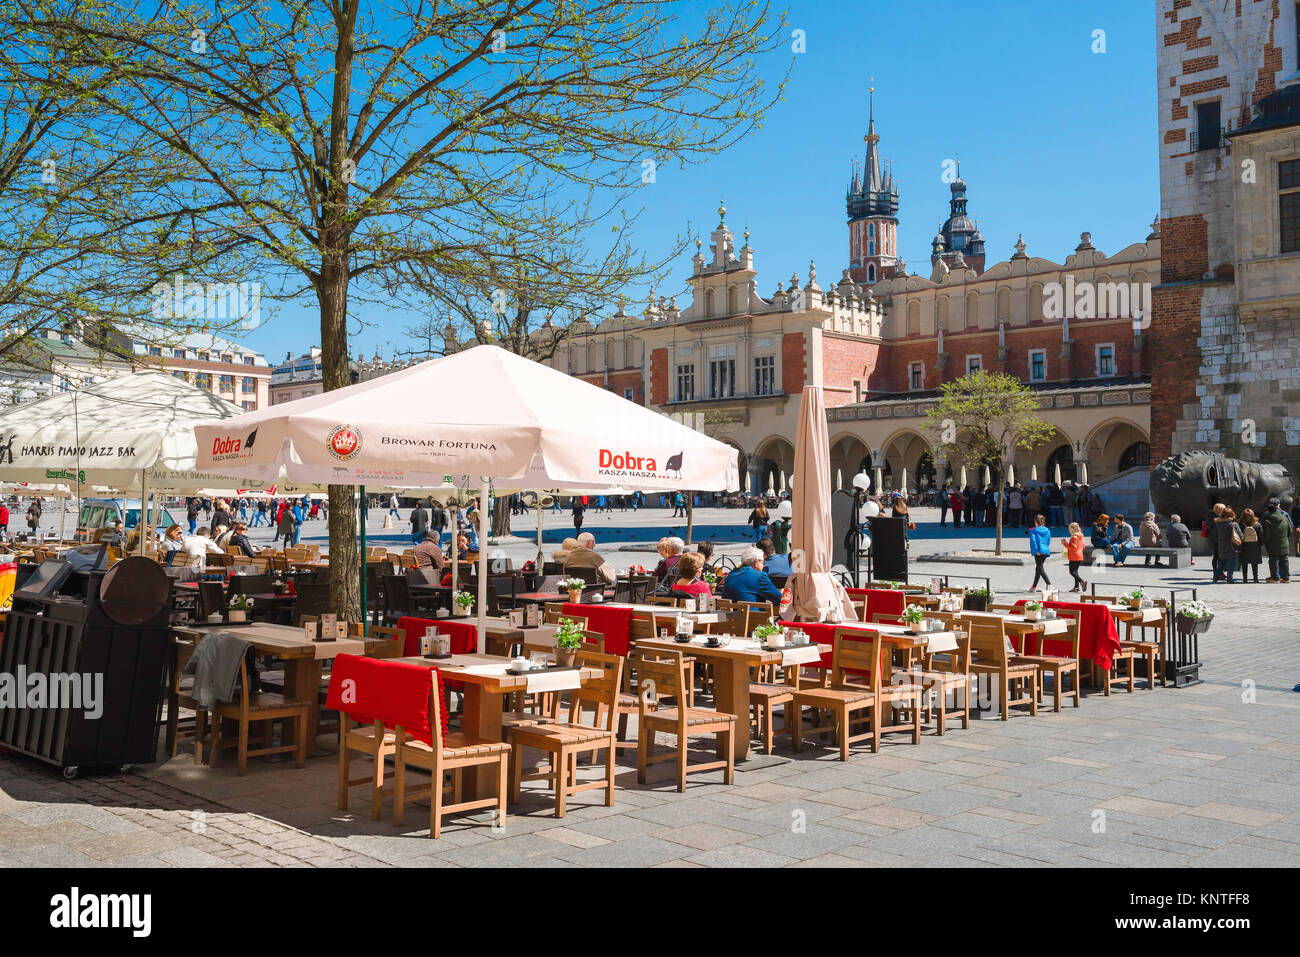 Market Square Krakow, a cafe terrace sited on the west side of Market Square (Rynek Glowny) facing the medieval Cloth Hall in Krakow old town, Poland. Stock Photo